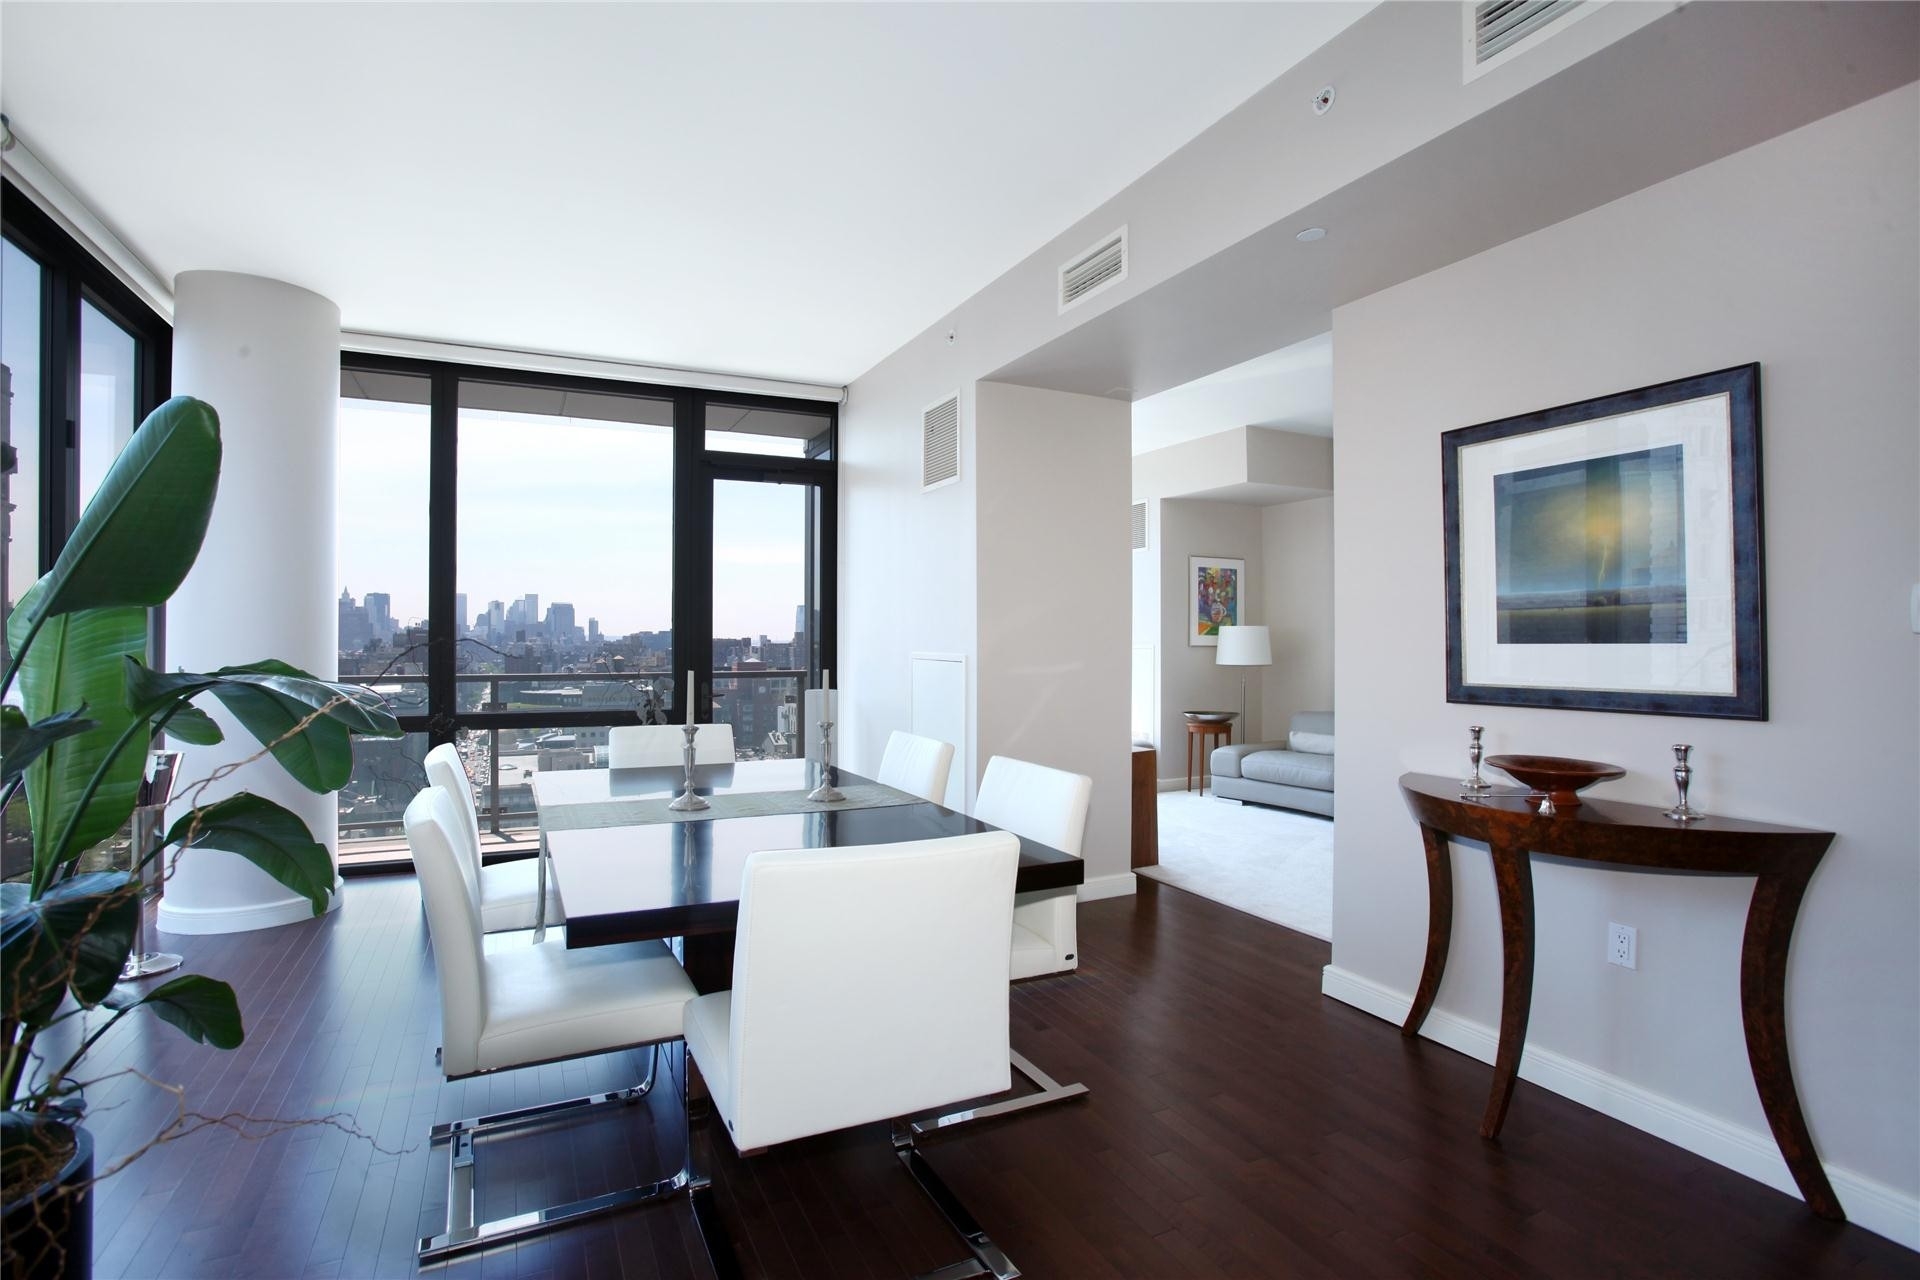 Property at 101 West 24th St, 20DE New York